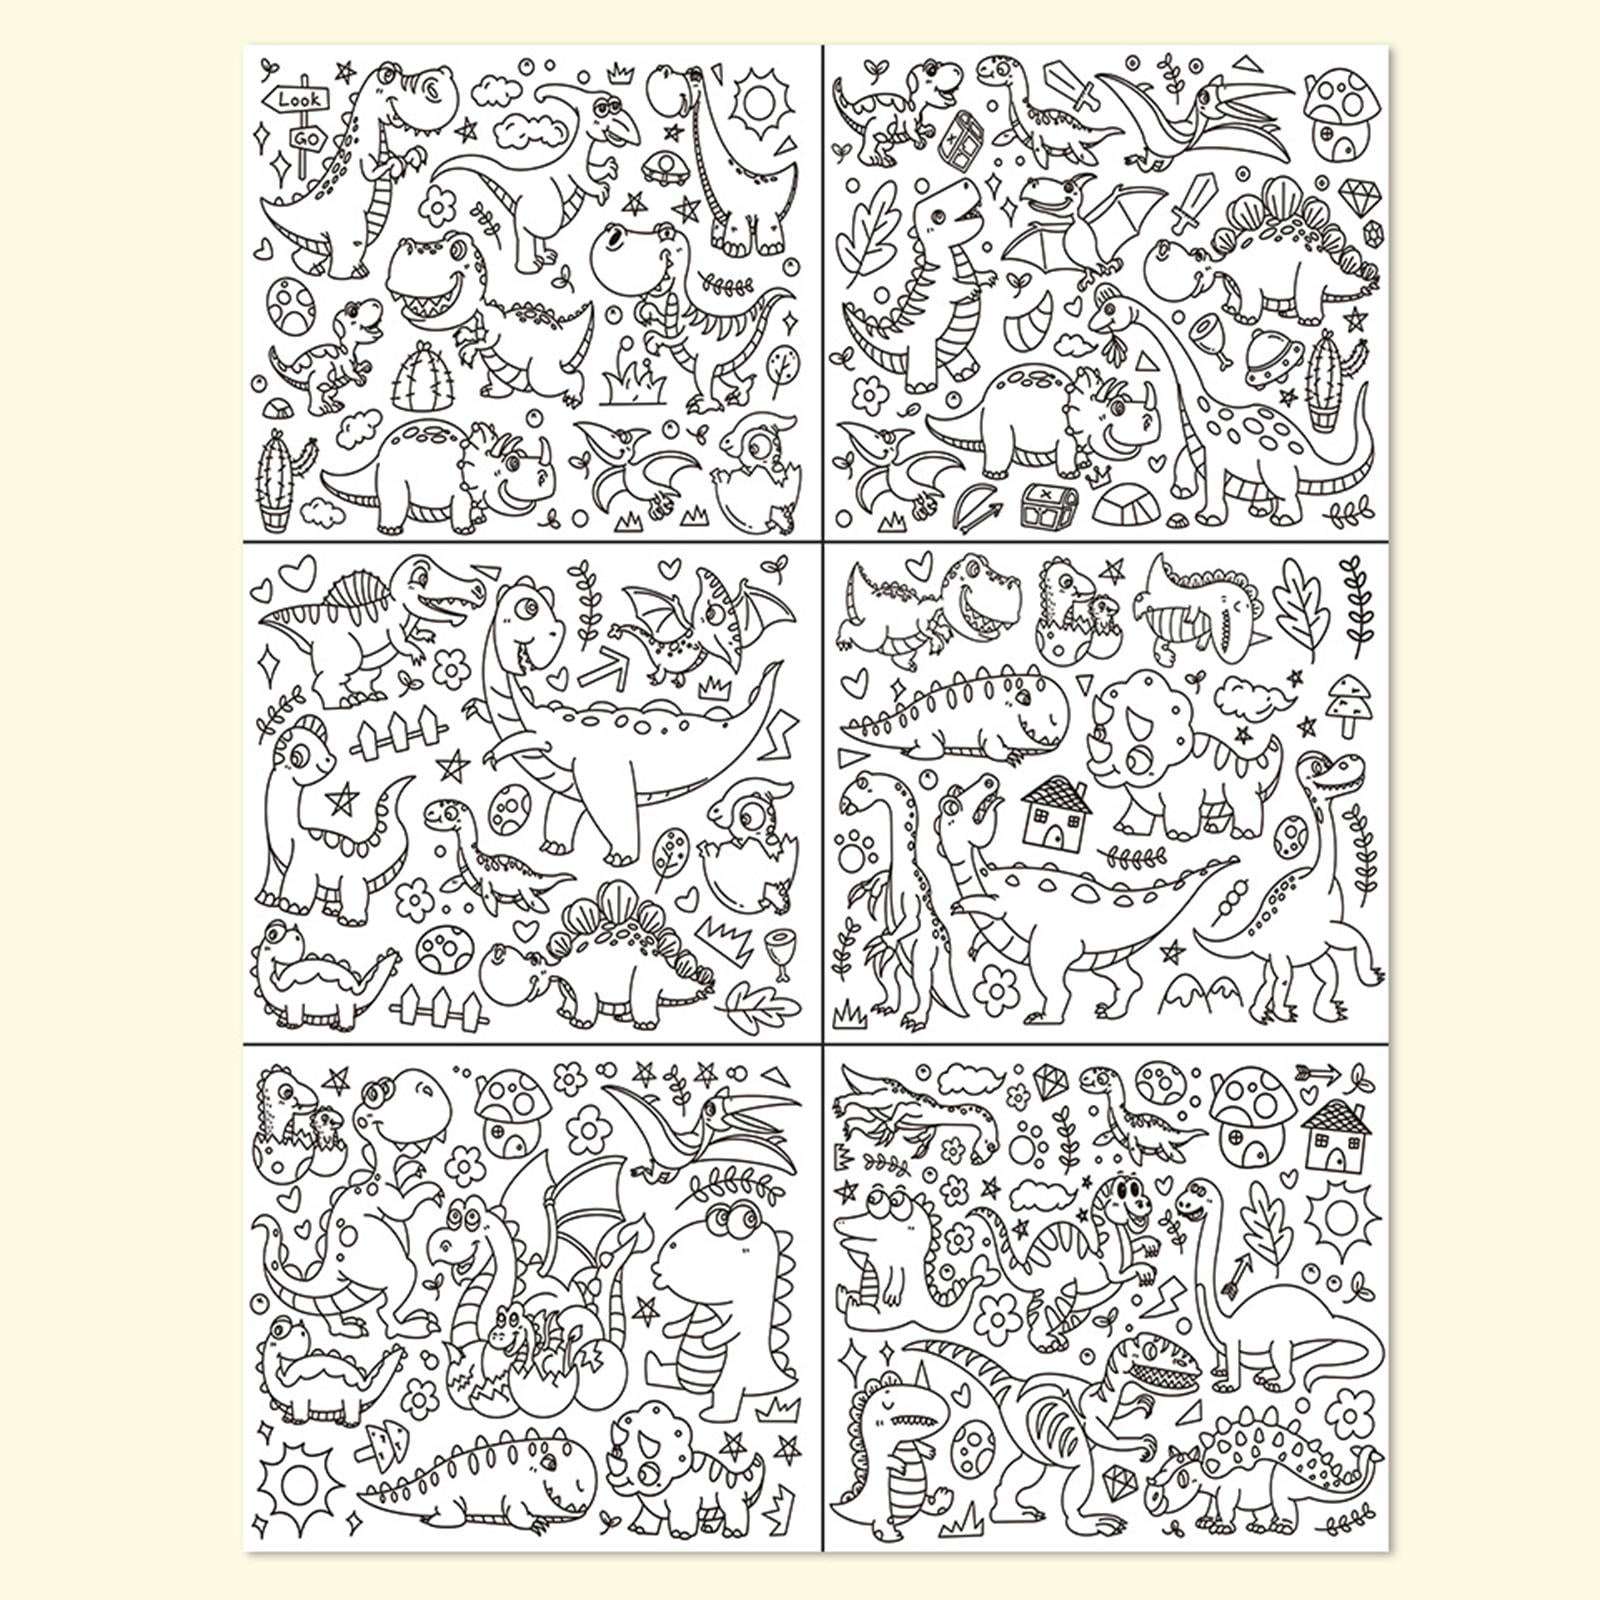 Best pages for large size drawings, // large drawing paper and canvas roll.  